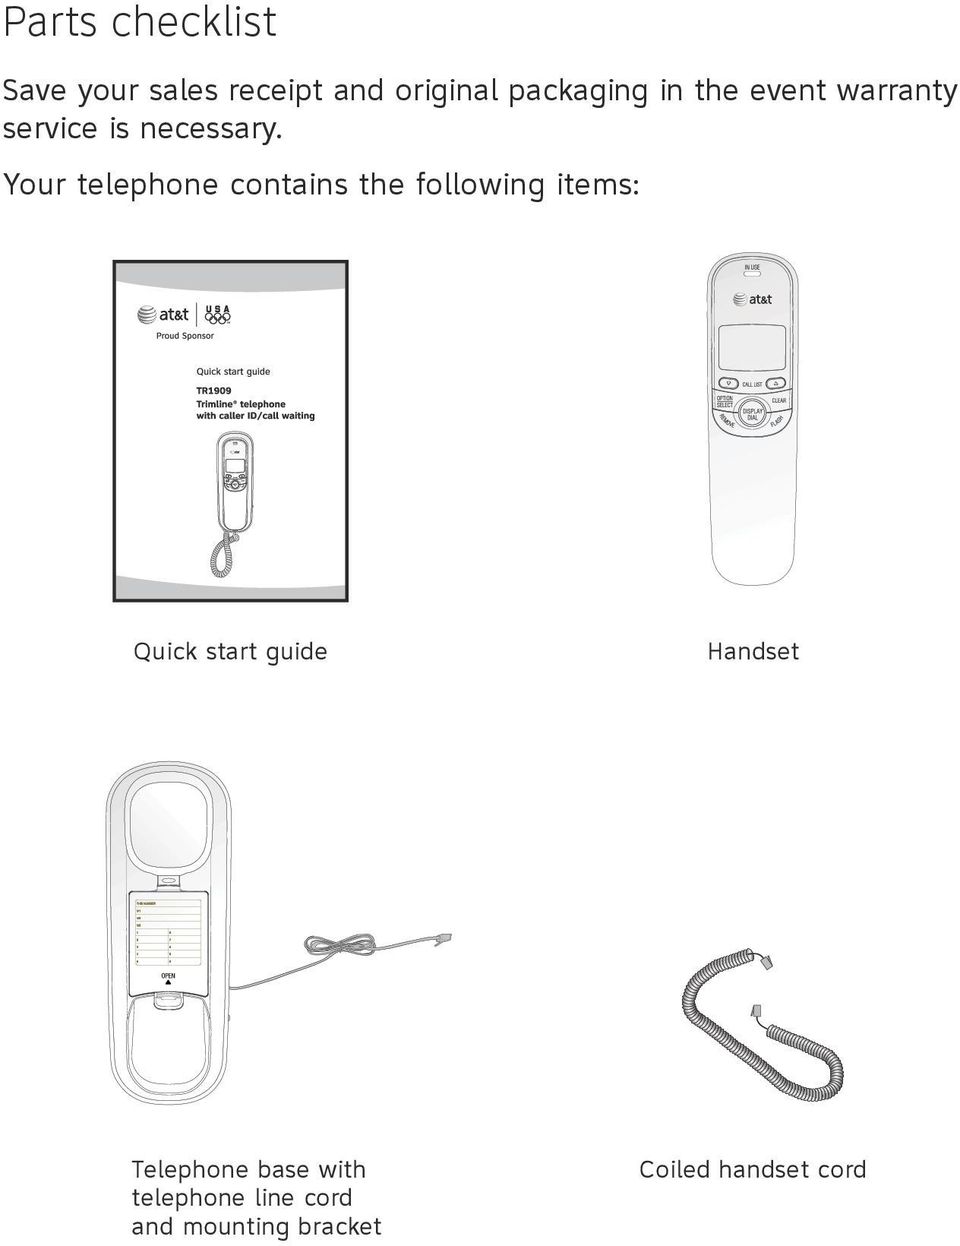 Your telephone contains the following items: Quick start guide